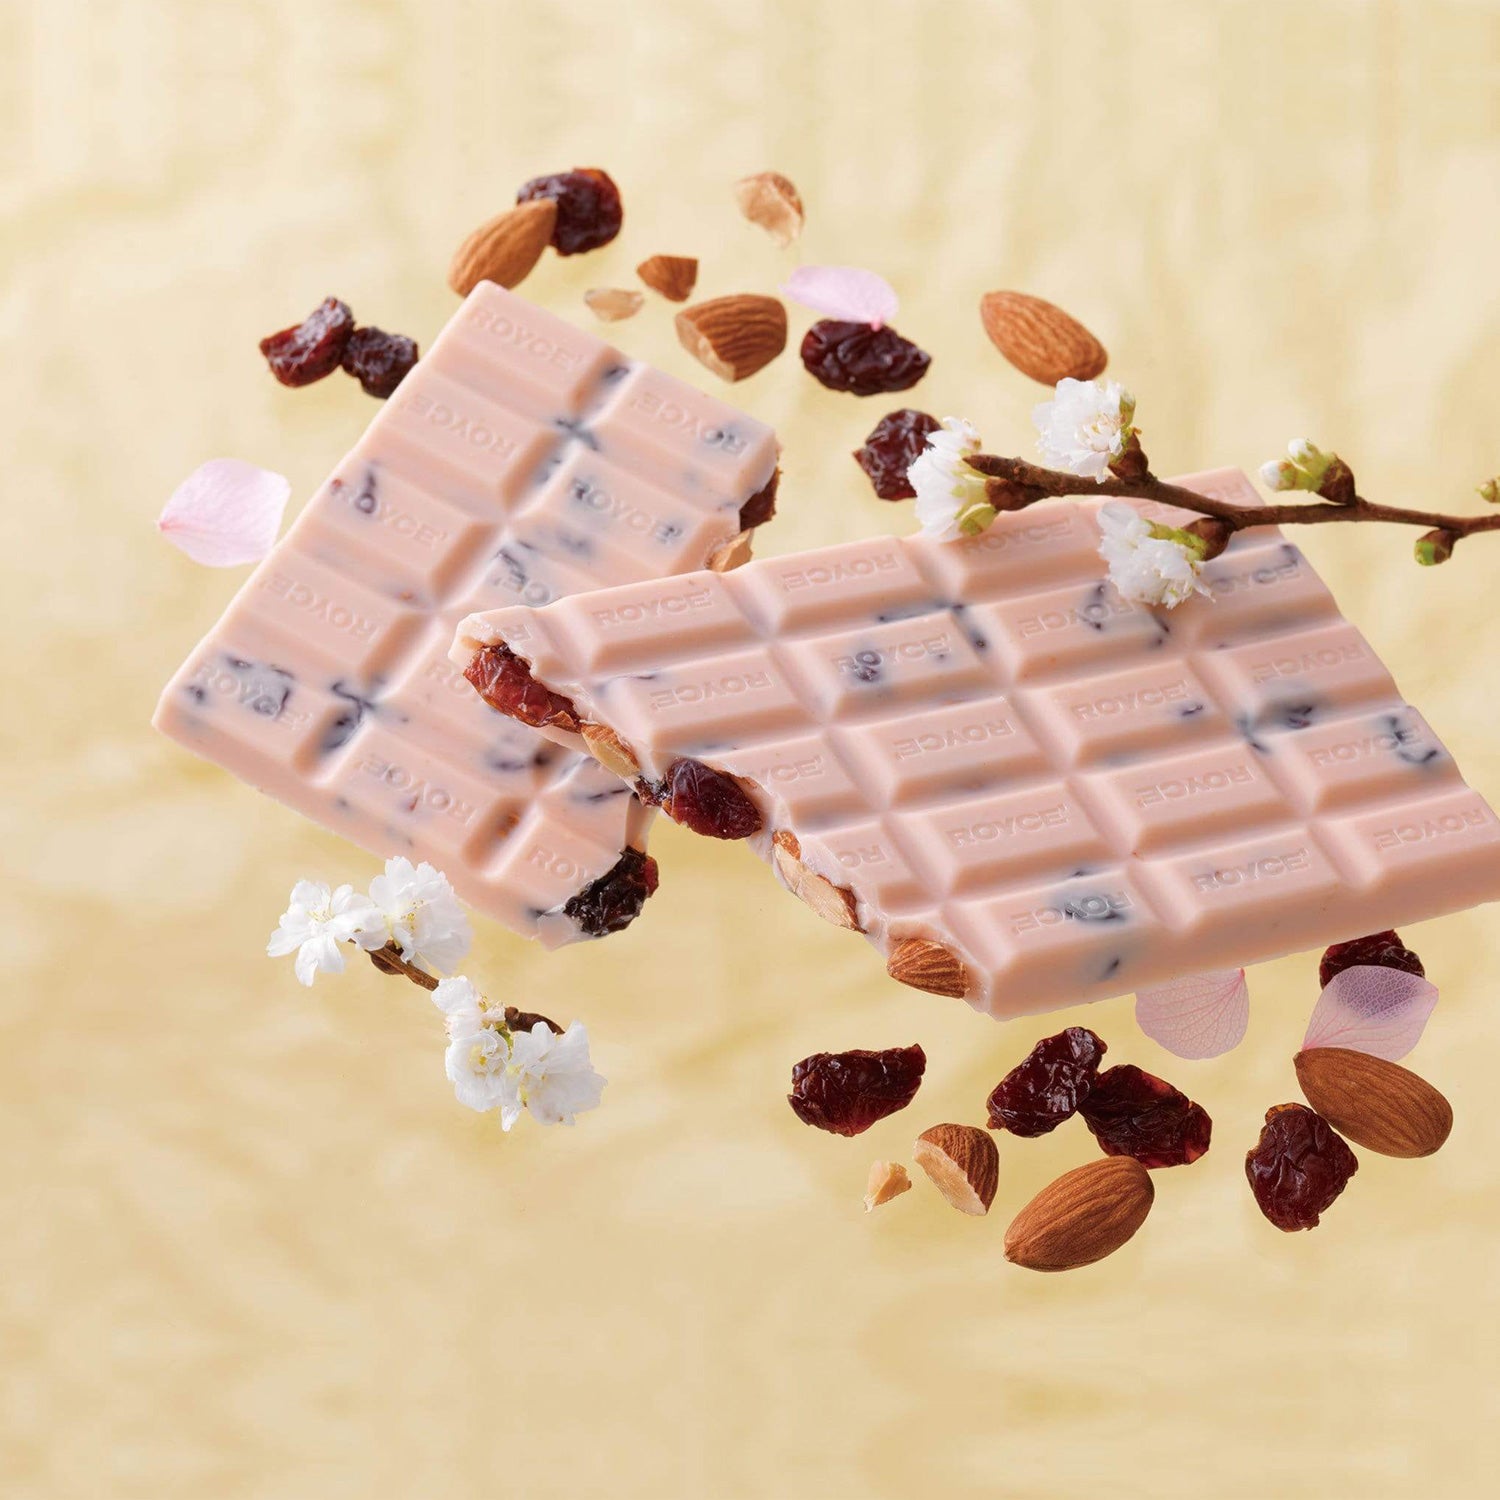 ROYCE' Chocolate - Chocolate Bar "Sakura Berry (Cherry & Almond)" - Image shows pink chocolate bars with dried cherries and almonds, as engraved with the word "ROYCE'". Accents include flowers in white and light pink with twigs in green and brown. Background is yellow in color.